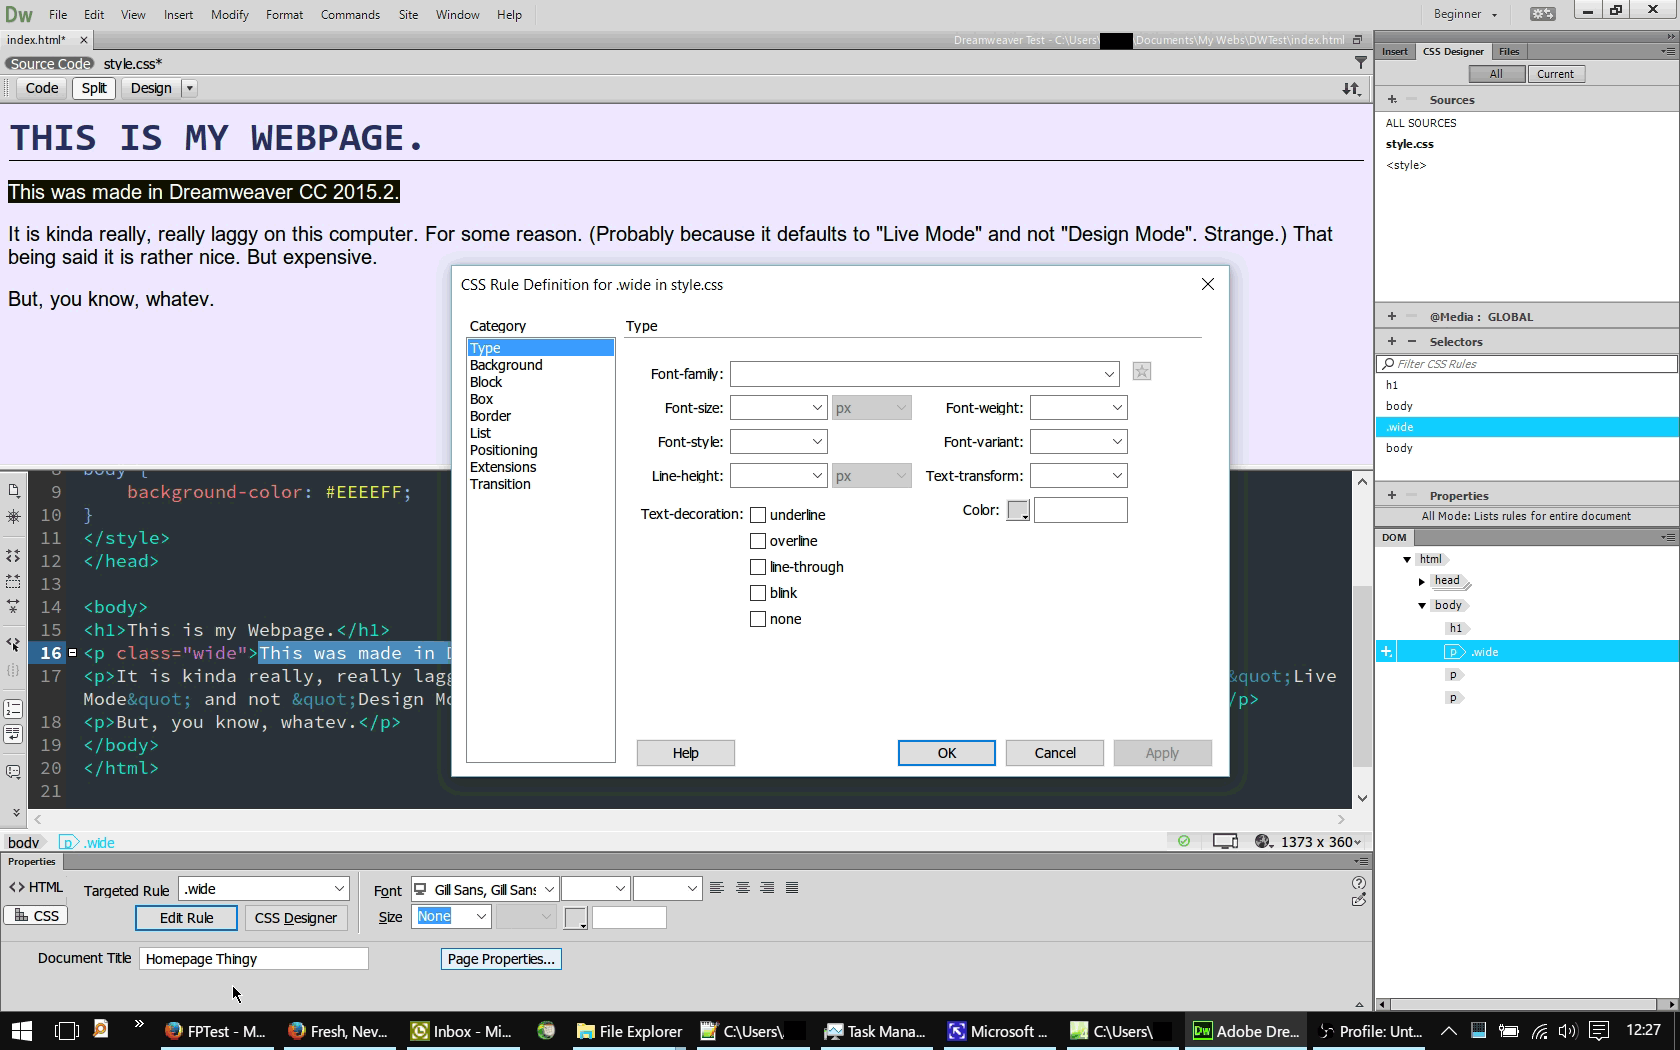 The style editor dialog that you can only access via the hidden Beginner mode